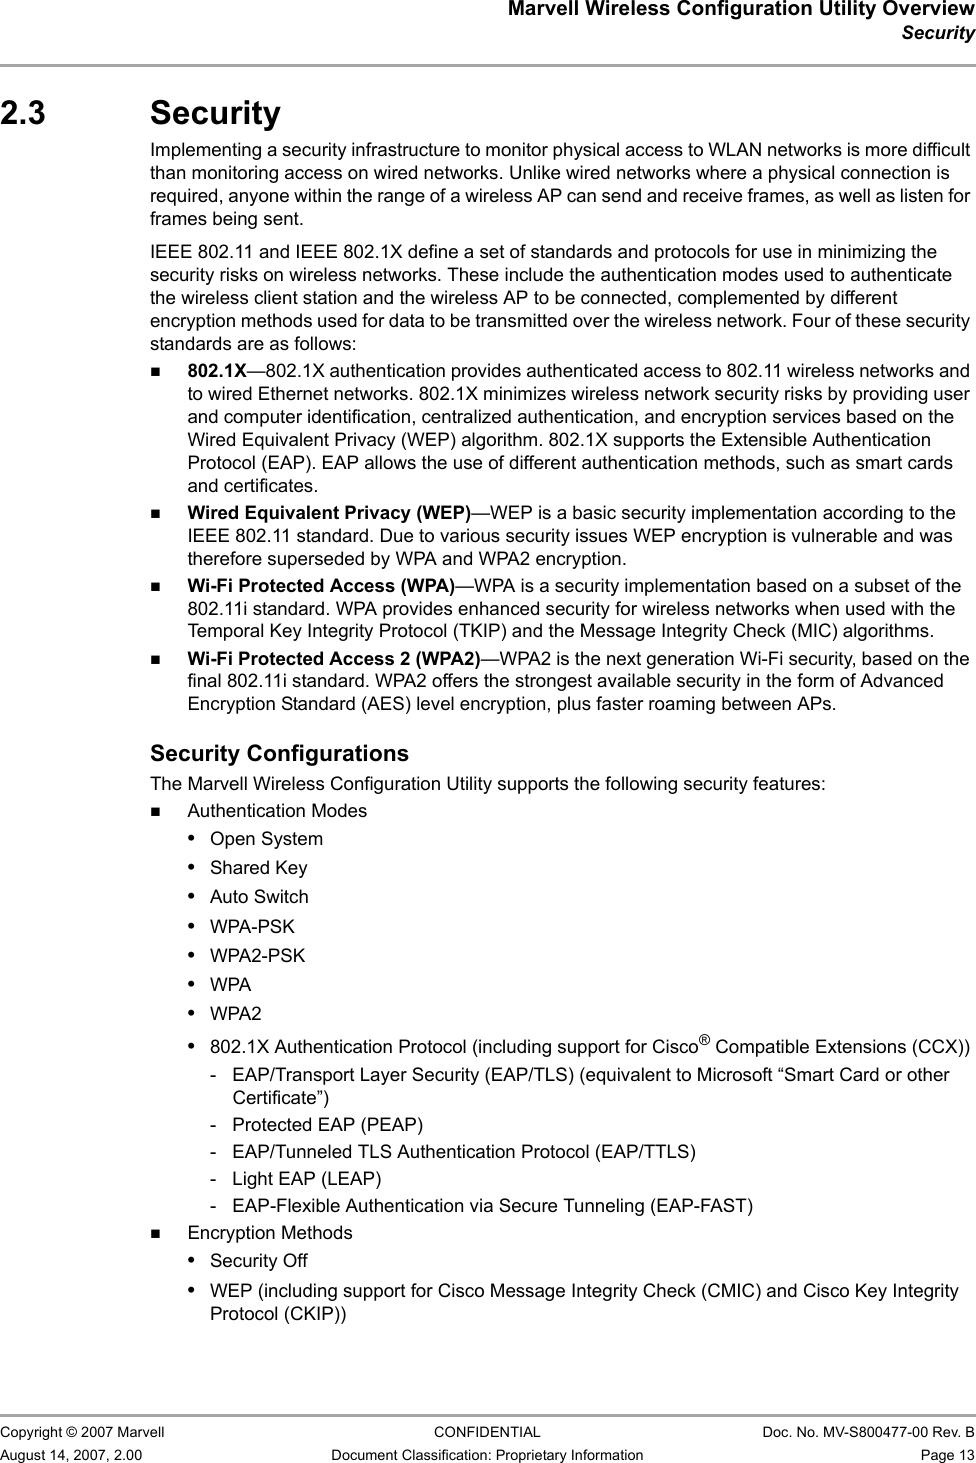 Marvell Wireless Configuration Utility OverviewSecurity                         Copyright © 2007 Marvell CONFIDENTIAL Doc. No. MV-S800477-00 Rev. BAugust 14, 2007, 2.00 Document Classification: Proprietary Information Page 13 2.3 SecurityImplementing a security infrastructure to monitor physical access to WLAN networks is more difficult than monitoring access on wired networks. Unlike wired networks where a physical connection is required, anyone within the range of a wireless AP can send and receive frames, as well as listen for frames being sent. IEEE 802.11 and IEEE 802.1X define a set of standards and protocols for use in minimizing the security risks on wireless networks. These include the authentication modes used to authenticate the wireless client station and the wireless AP to be connected, complemented by different encryption methods used for data to be transmitted over the wireless network. Four of these security standards are as follows:802.1X—802.1X authentication provides authenticated access to 802.11 wireless networks and to wired Ethernet networks. 802.1X minimizes wireless network security risks by providing user and computer identification, centralized authentication, and encryption services based on the Wired Equivalent Privacy (WEP) algorithm. 802.1X supports the Extensible Authentication Protocol (EAP). EAP allows the use of different authentication methods, such as smart cards and certificates.Wired Equivalent Privacy (WEP)—WEP is a basic security implementation according to the IEEE 802.11 standard. Due to various security issues WEP encryption is vulnerable and was therefore superseded by WPA and WPA2 encryption.Wi-Fi Protected Access (WPA)—WPA is a security implementation based on a subset of the 802.11i standard. WPA provides enhanced security for wireless networks when used with the Temporal Key Integrity Protocol (TKIP) and the Message Integrity Check (MIC) algorithms.Wi-Fi Protected Access 2 (WPA2)—WPA2 is the next generation Wi-Fi security, based on the final 802.11i standard. WPA2 offers the strongest available security in the form of Advanced Encryption Standard (AES) level encryption, plus faster roaming between APs.Security ConfigurationsThe Marvell Wireless Configuration Utility supports the following security features:Authentication Modes•Open System•Shared Key•Auto Switch•WPA-PSK•WPA2-PSK•WPA•WPA2•802.1X Authentication Protocol (including support for Cisco® Compatible Extensions (CCX))-  EAP/Transport Layer Security (EAP/TLS) (equivalent to Microsoft “Smart Card or other Certificate”)-  Protected EAP (PEAP)-  EAP/Tunneled TLS Authentication Protocol (EAP/TTLS)- Light EAP (LEAP)- EAP-Flexible Authentication via Secure Tunneling (EAP-FAST)Encryption Methods•Security Off•WEP (including support for Cisco Message Integrity Check (CMIC) and Cisco Key Integrity Protocol (CKIP))